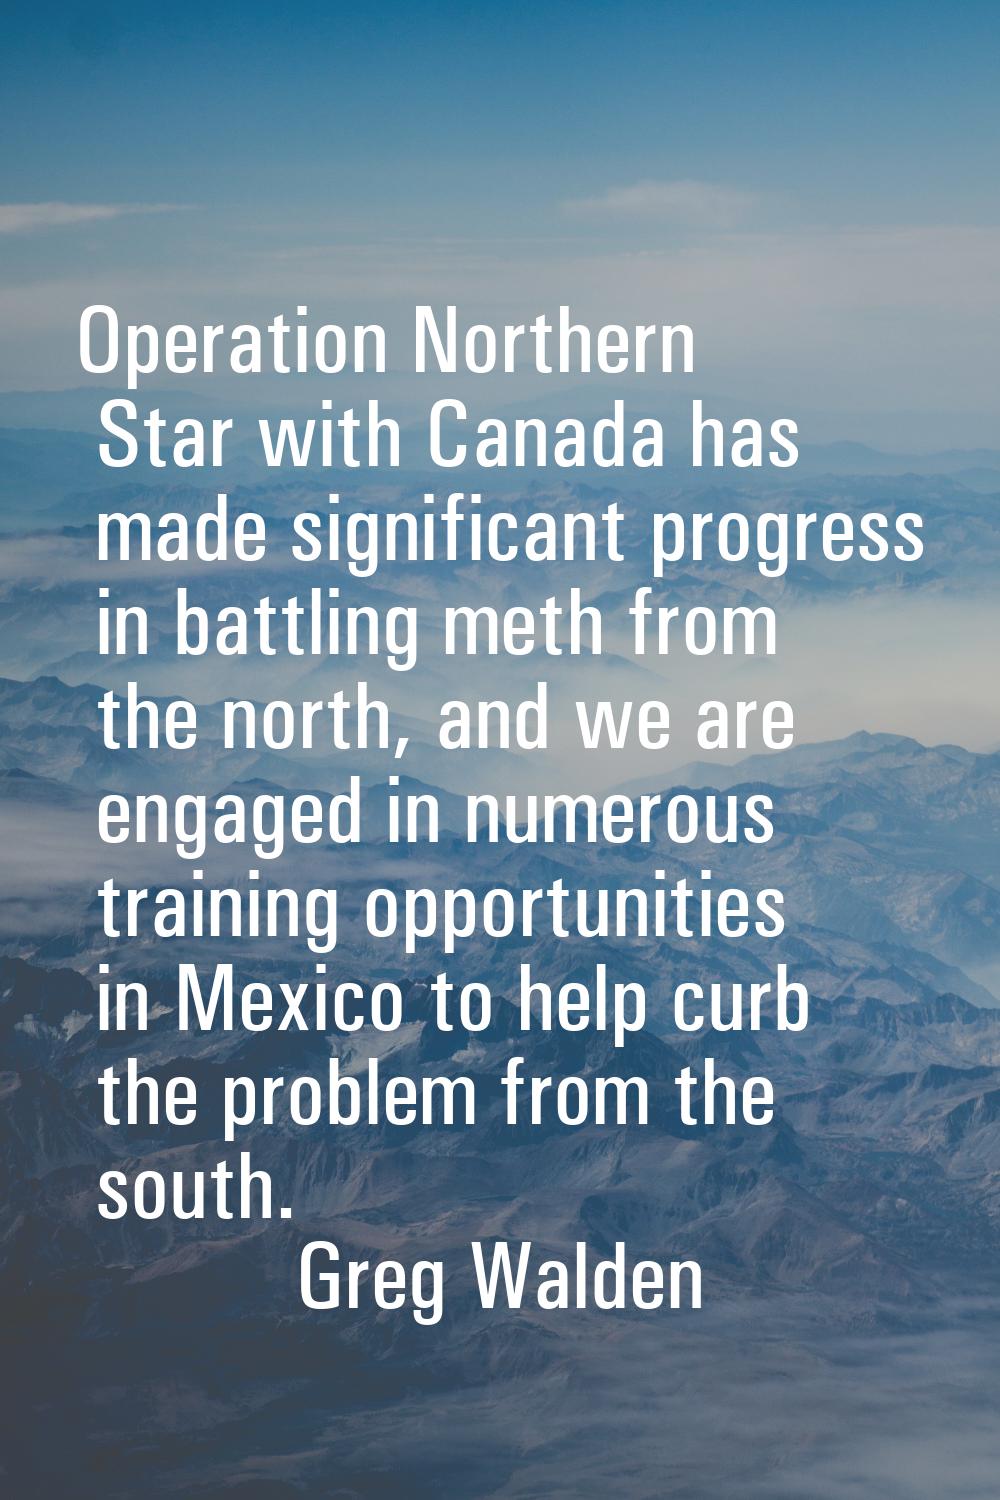 Operation Northern Star with Canada has made significant progress in battling meth from the north, 